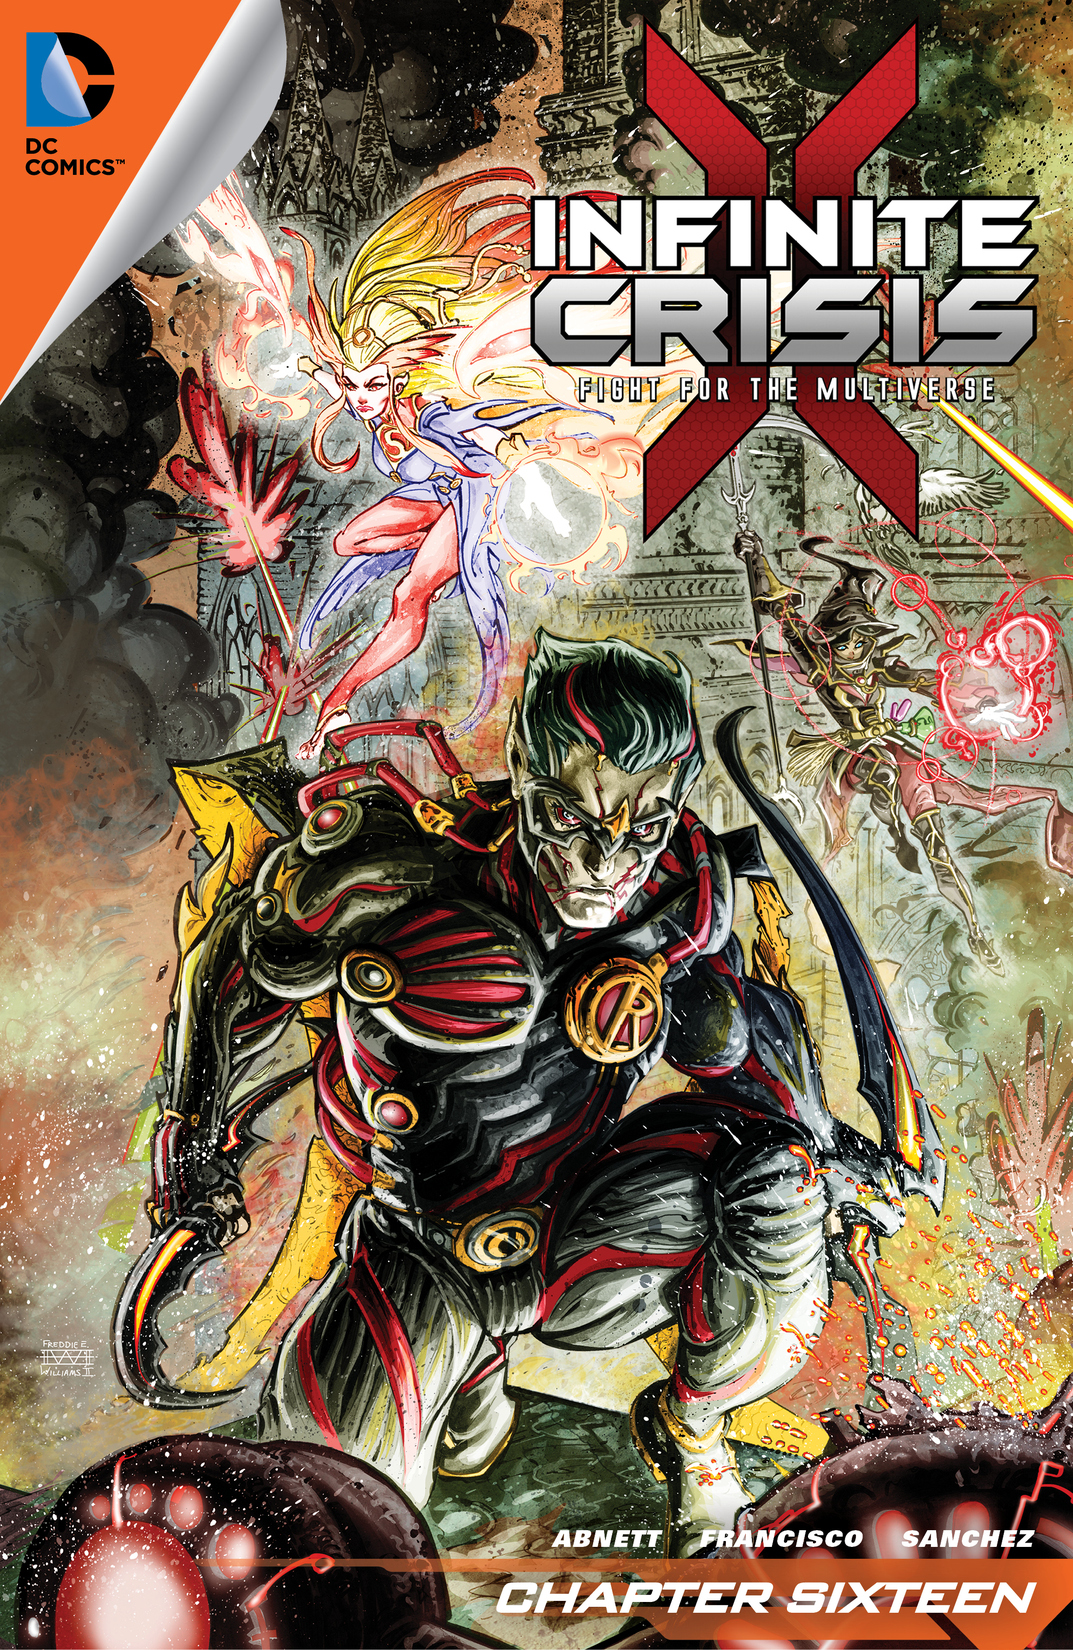 Infinite Crisis: Fight for the Multiverse #16 preview images